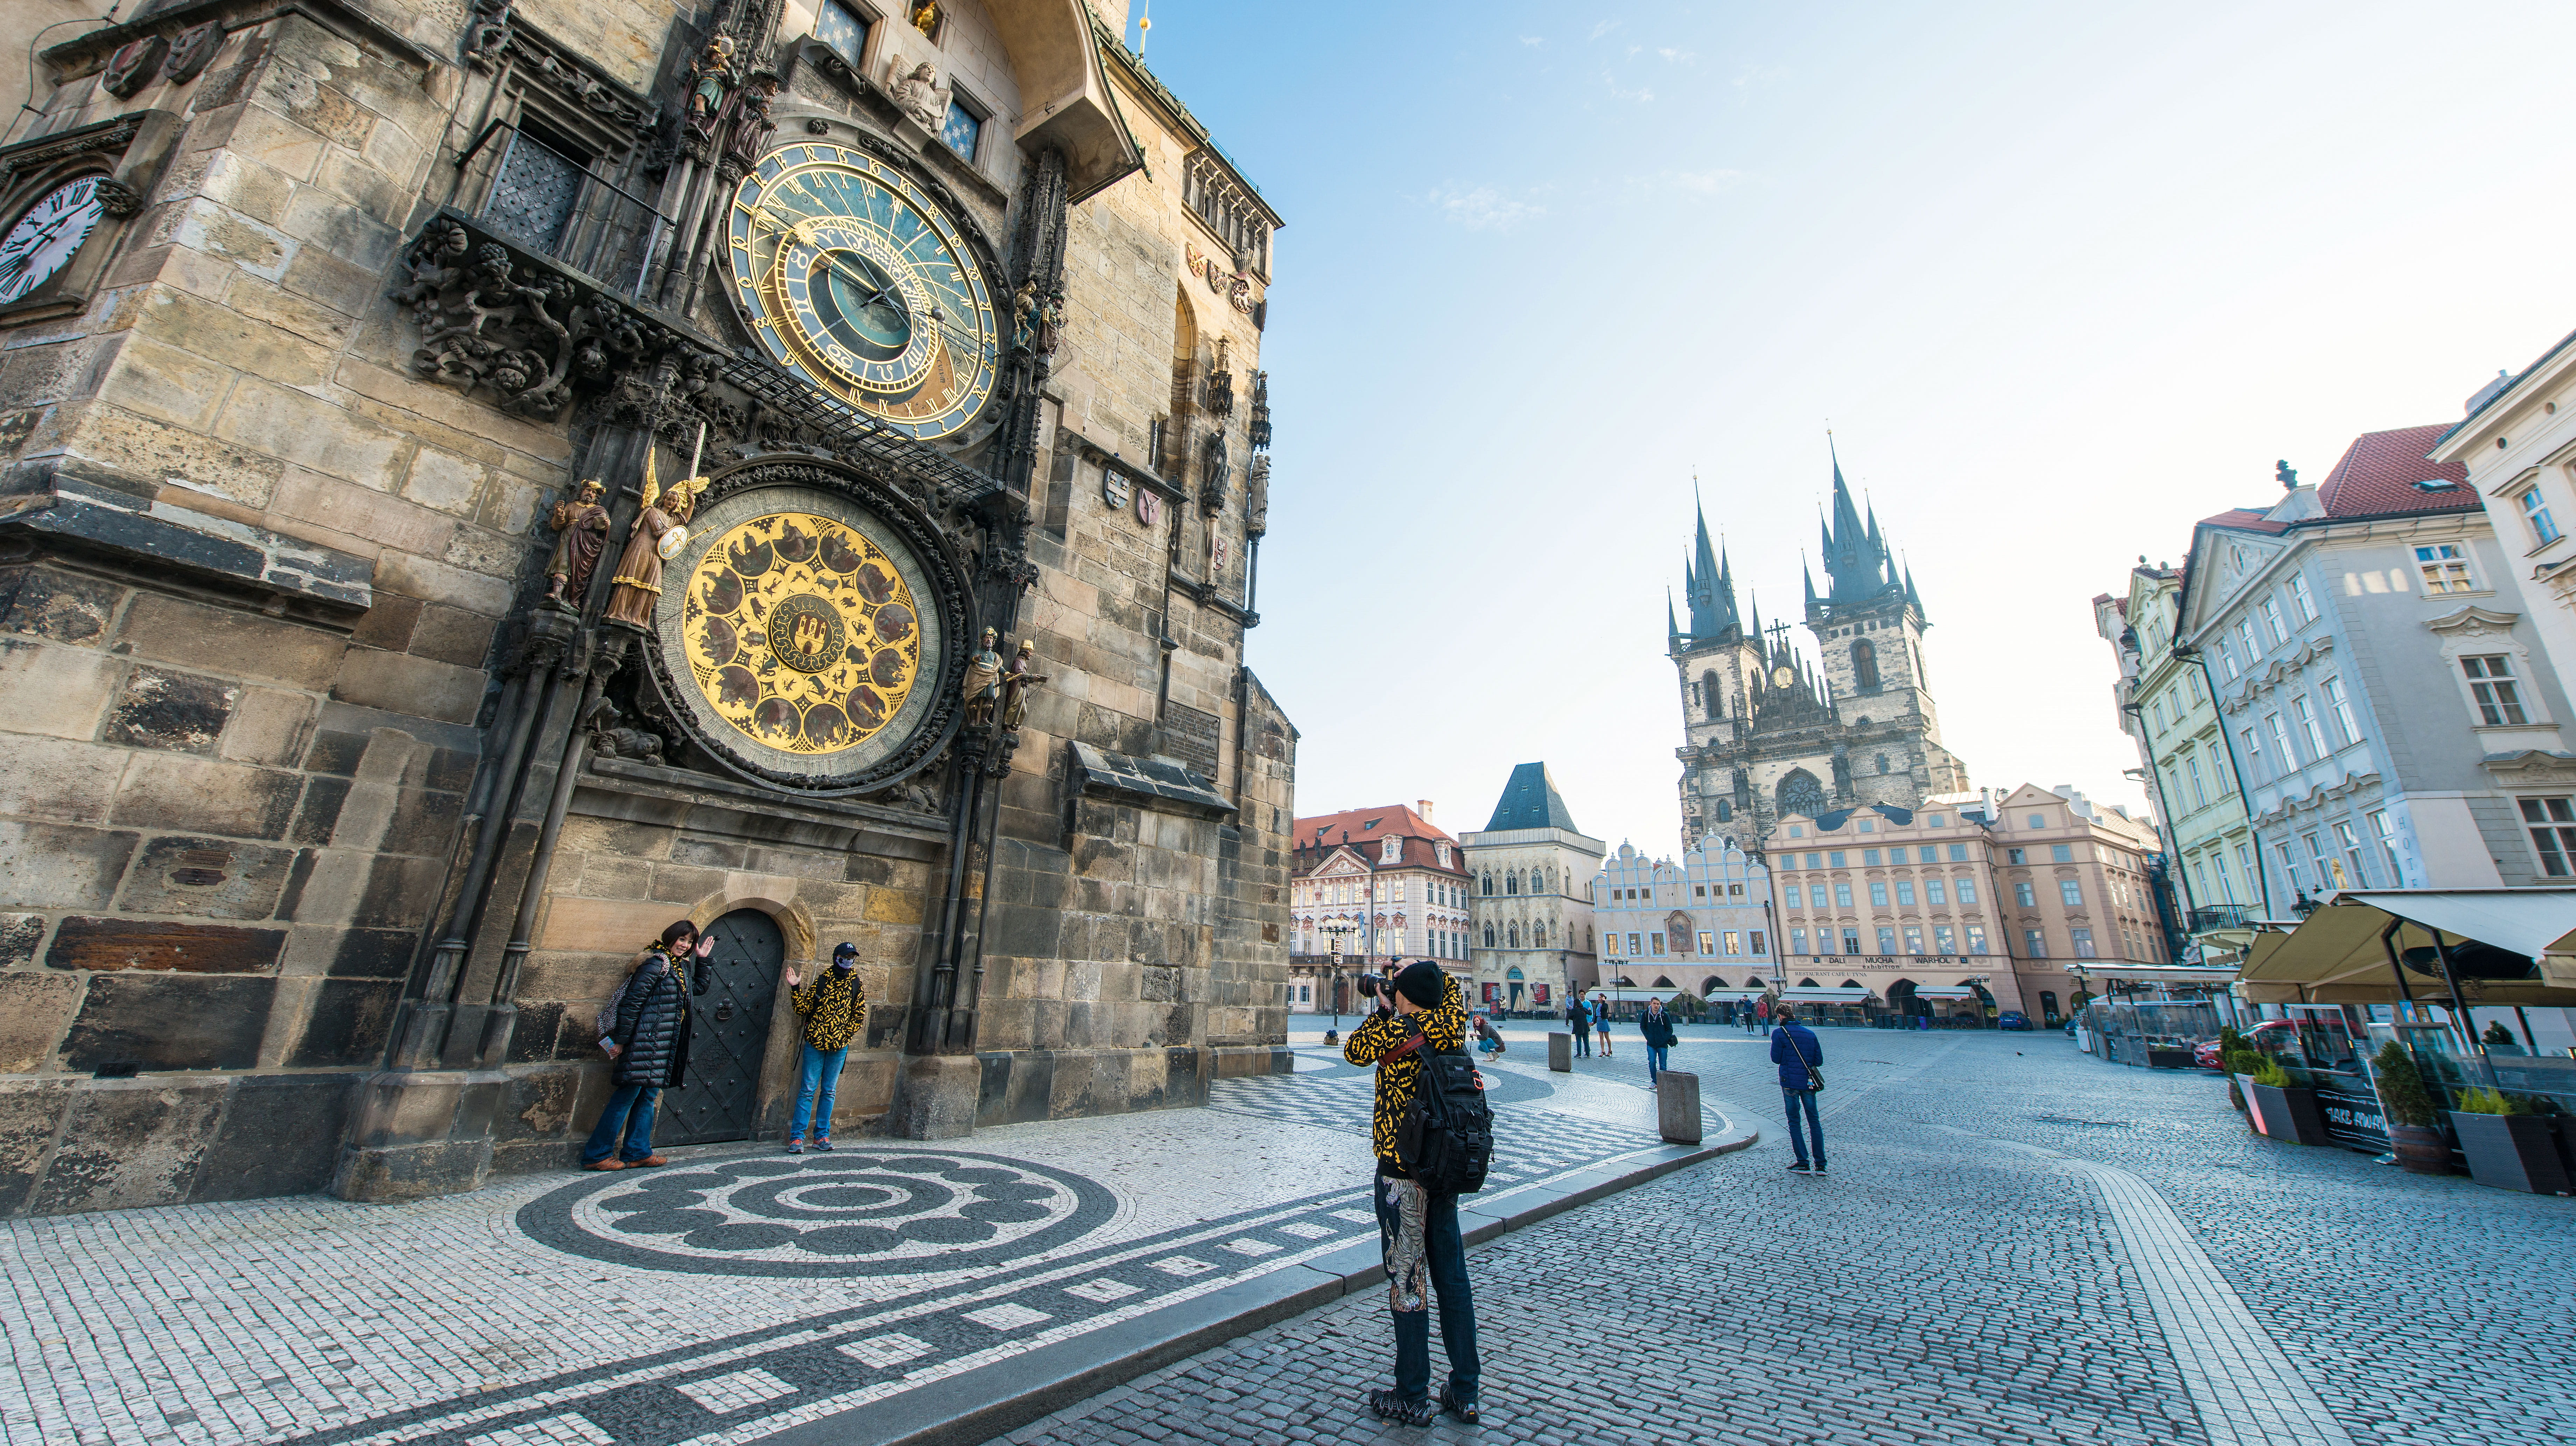 Astronomical Clock in Old Town Square Prague